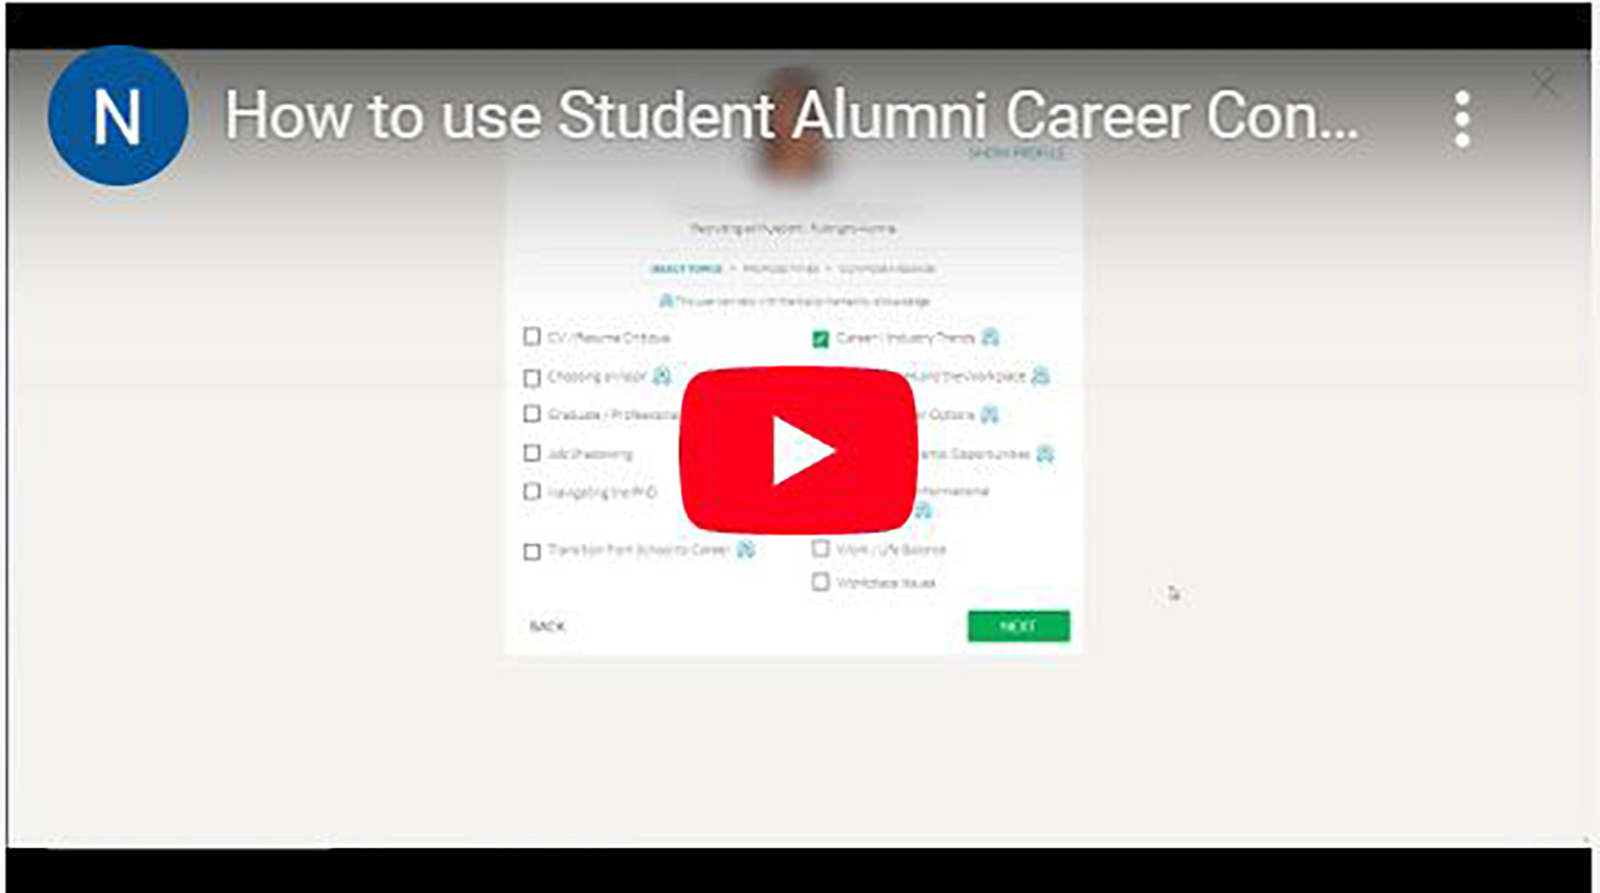 How to use Student Alumni Career Connect (SACC)